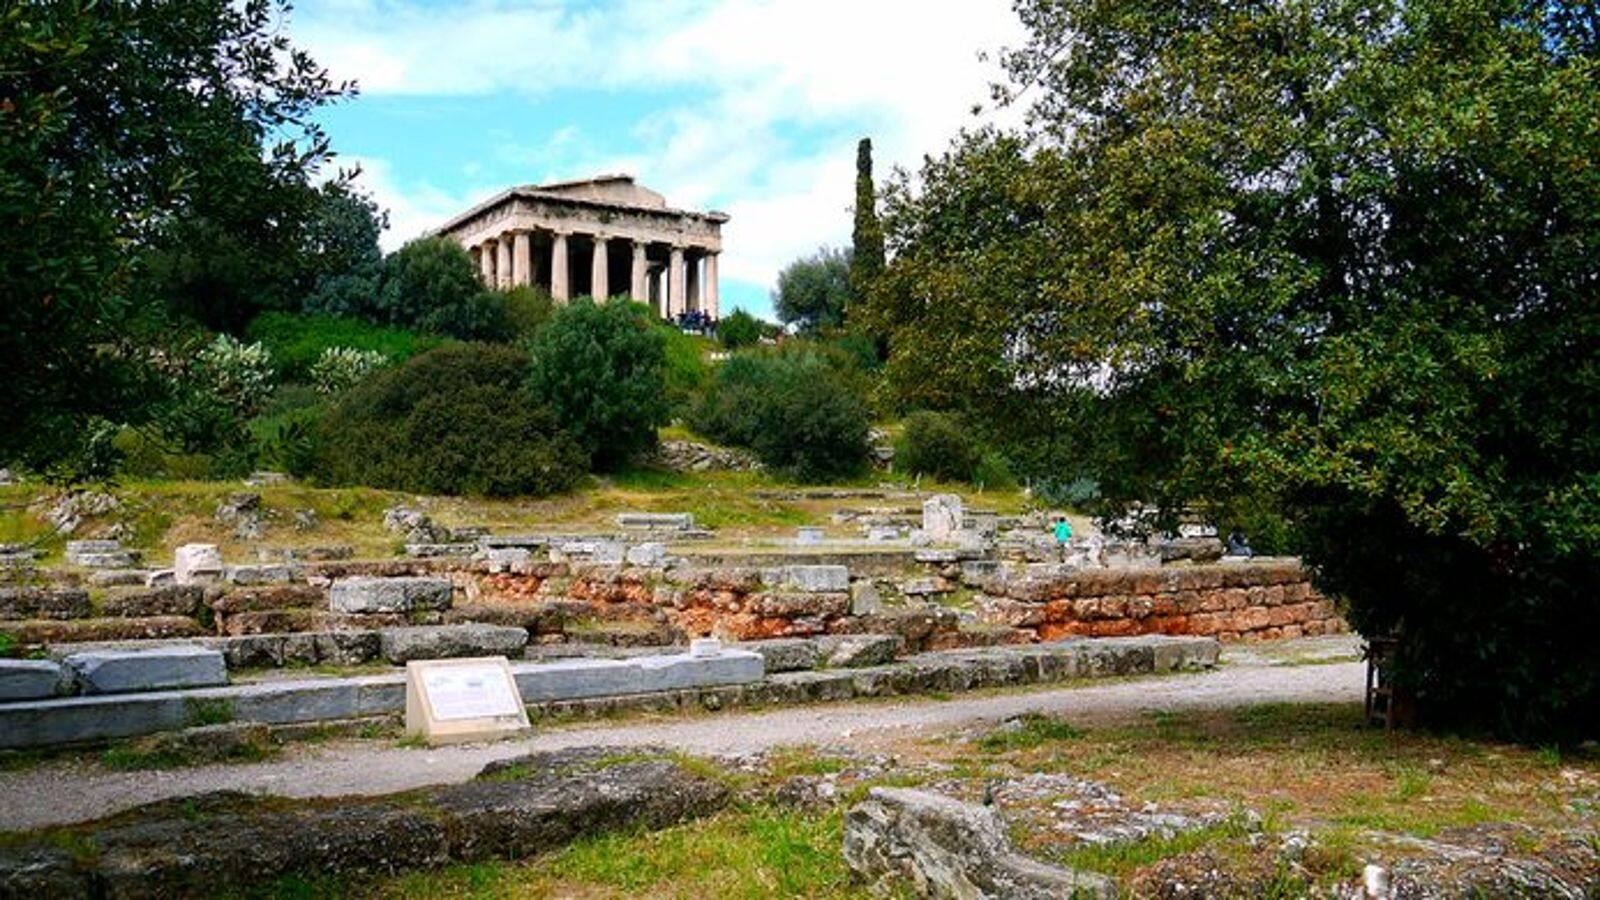 Athens' ancient Agora adventure is perfect for travelers-cum-history buffs